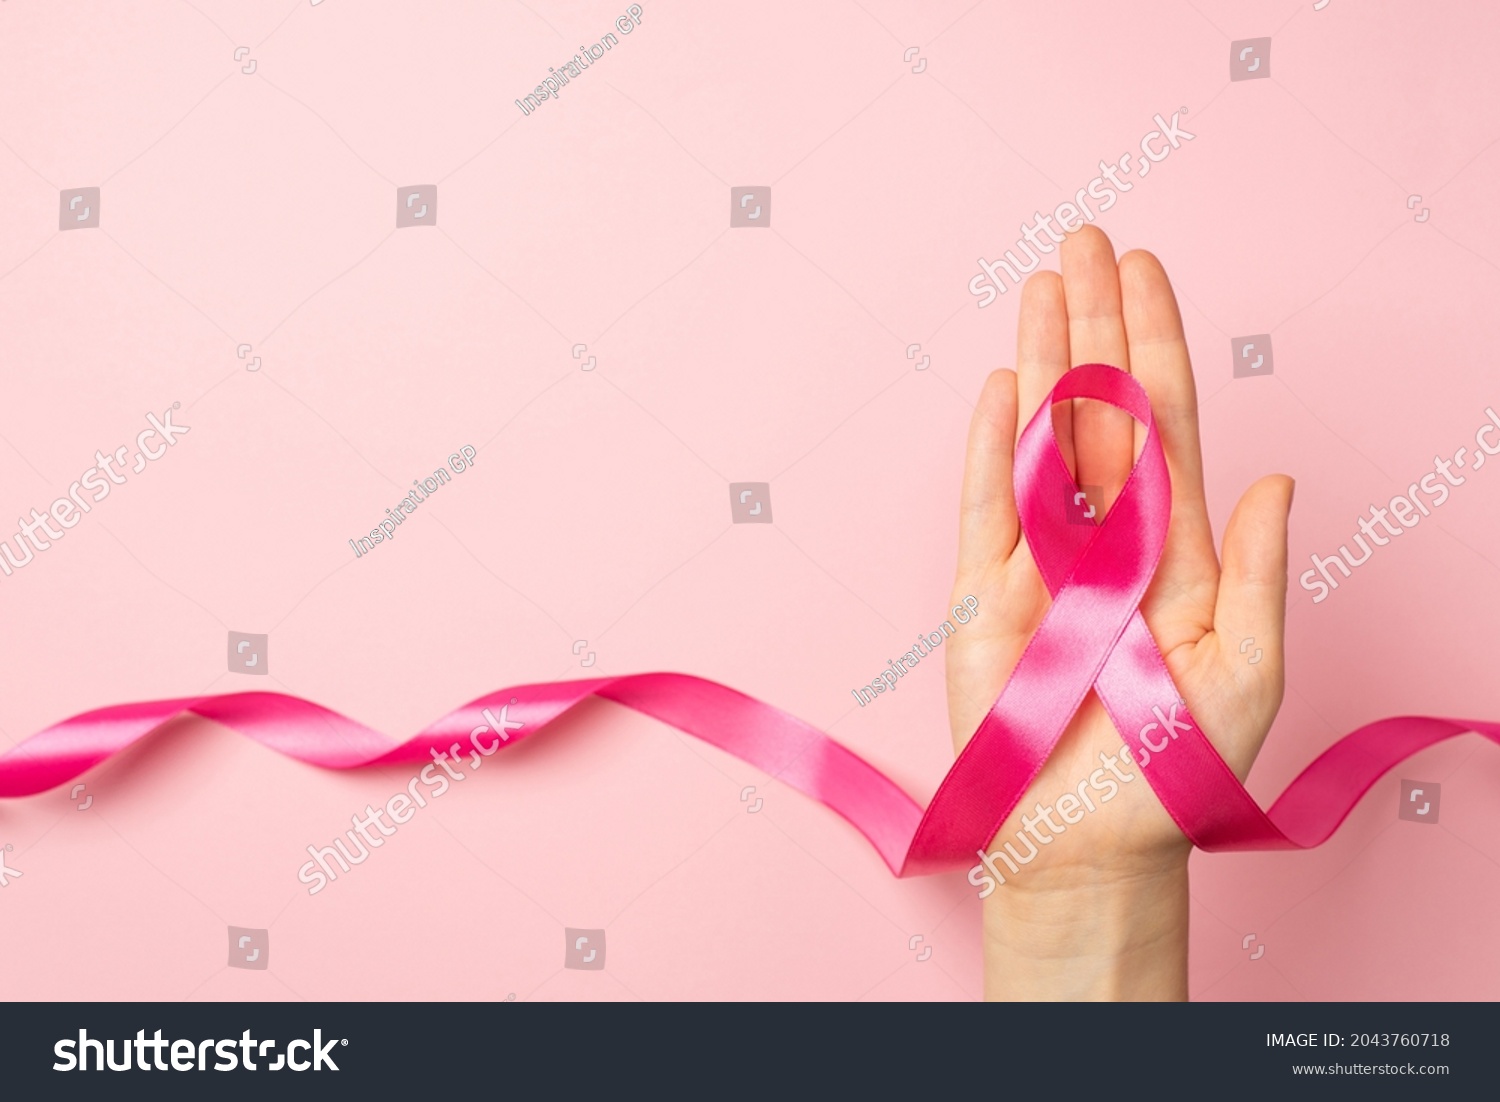 First person top view photo of female hand holding pink ribbon in palm symbol of breast cancer awareness on isolated pastel pink background with copyspace #2043760718